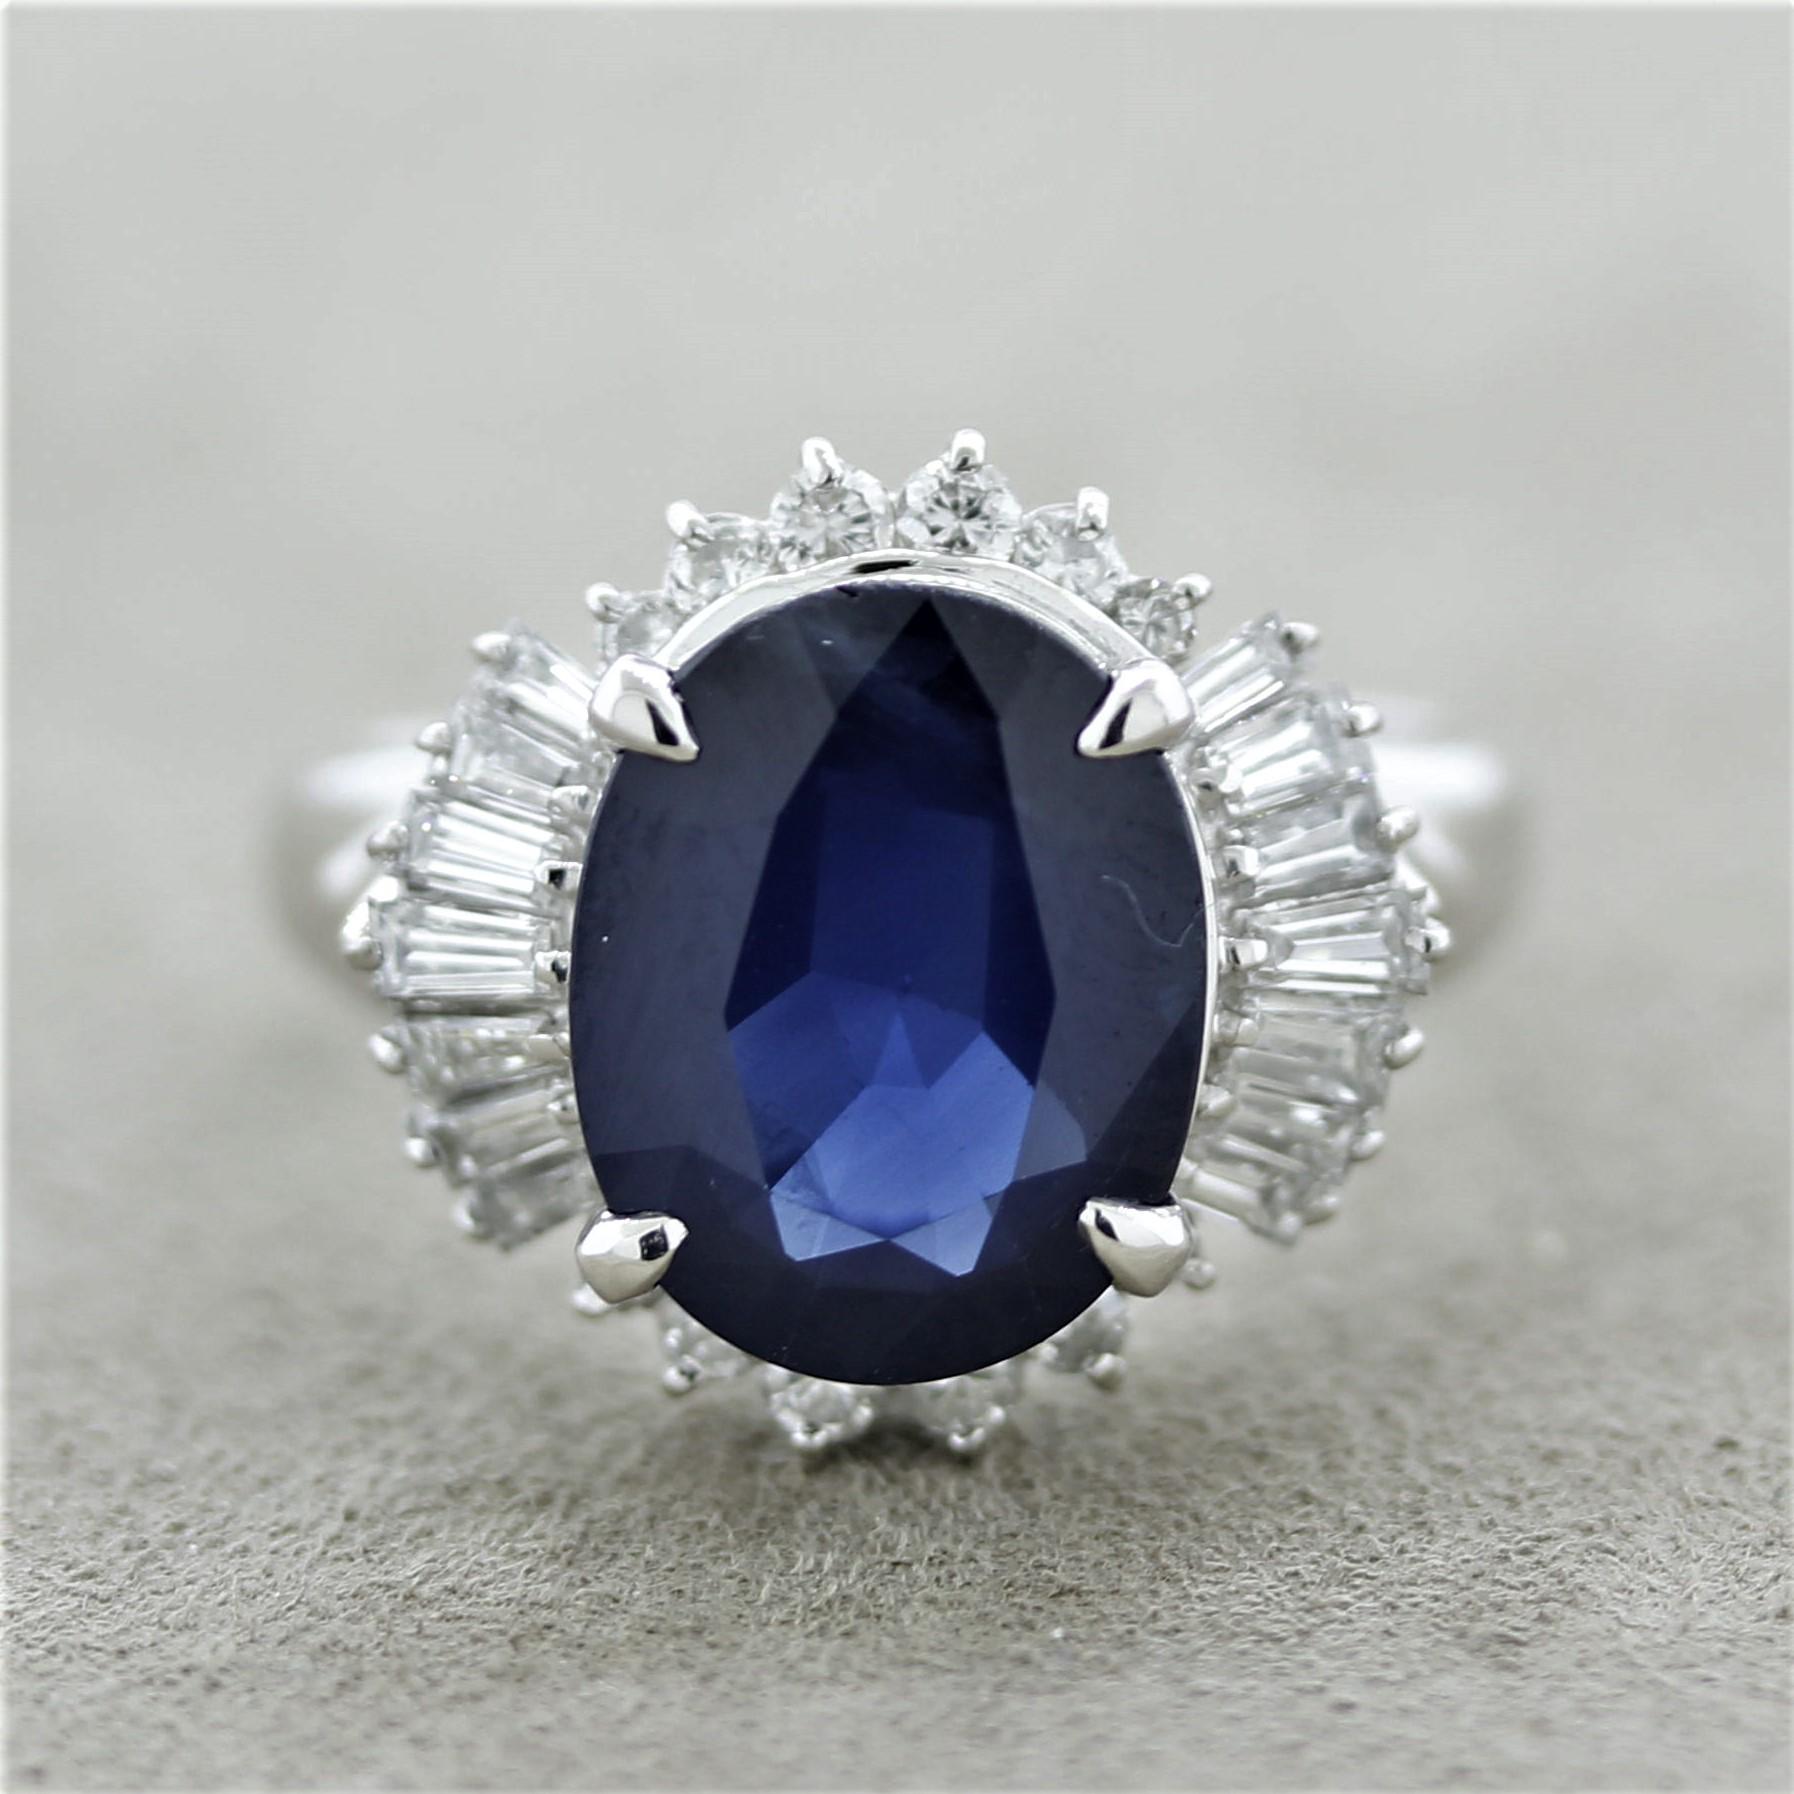 An elegant platinum ring featuring an oval shape sapphire weighing 6.02 carats with a rich midnight blue color. It is complemented by 0.78 carats of round brilliant-cut and baguette-cut diamonds set around the sapphire in a stylish pattern.